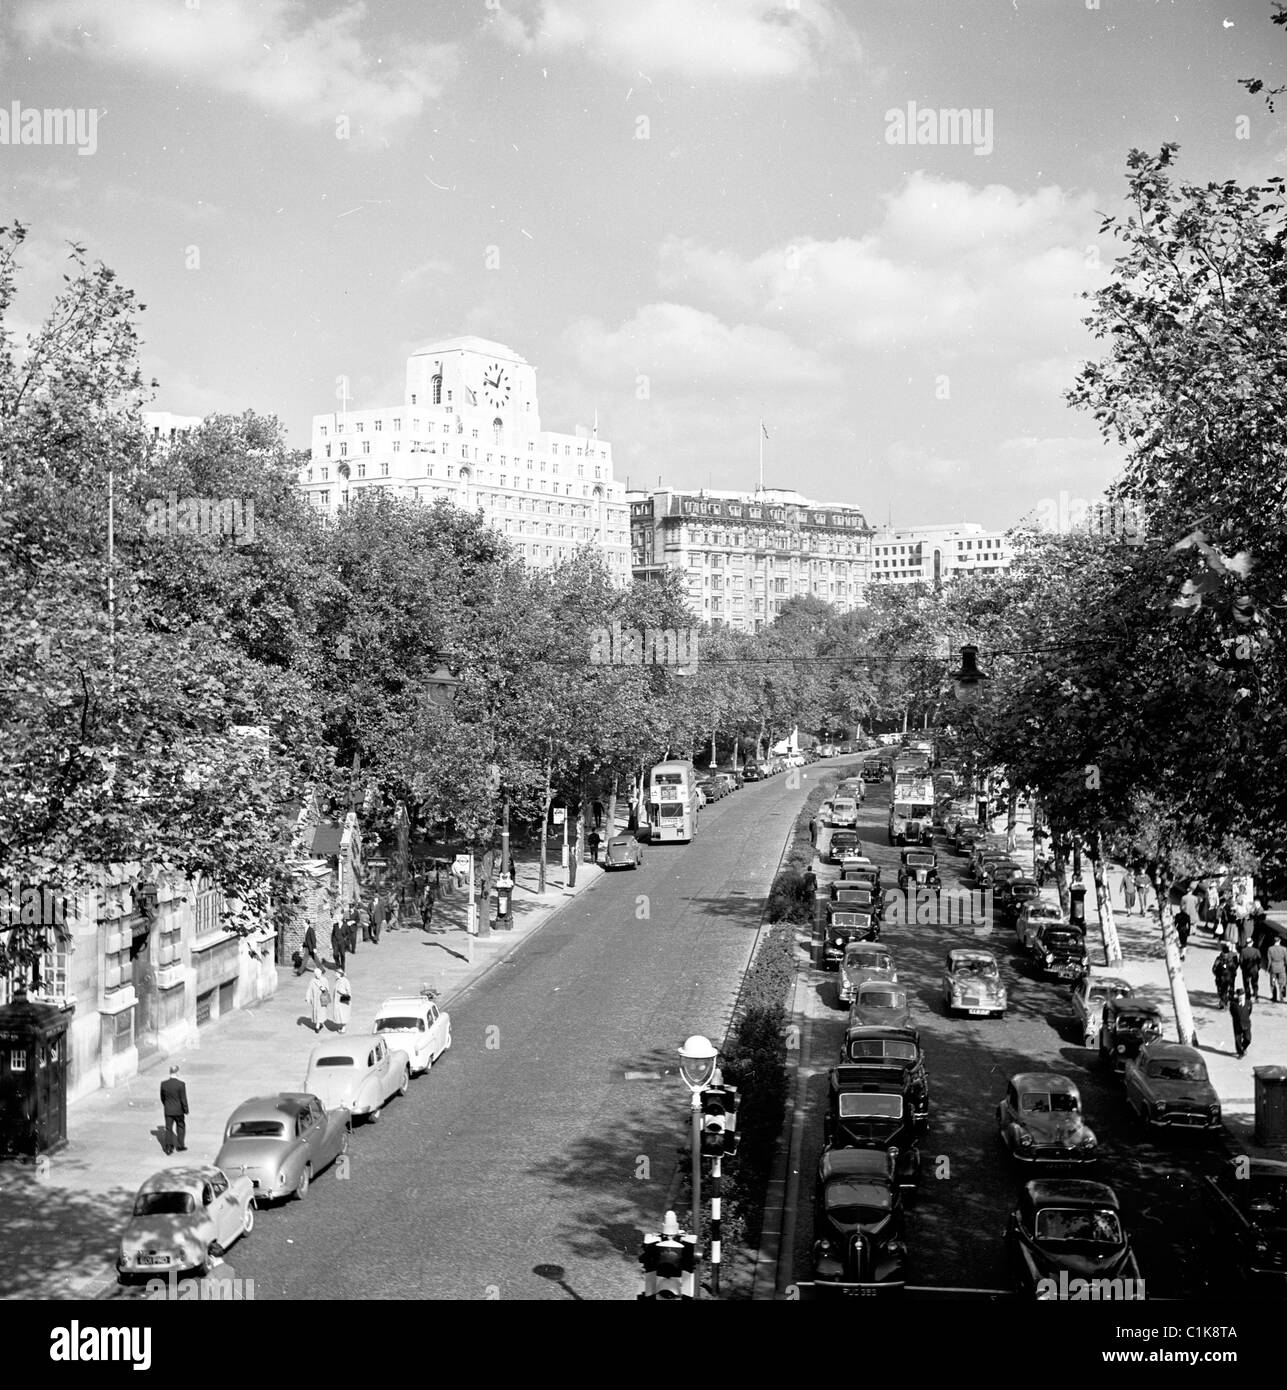 1950, view over the Victoria Embankment by the River Thames, a road, opened in 1870, that runs from the Palace of Westminster to the City of London. Stock Photo